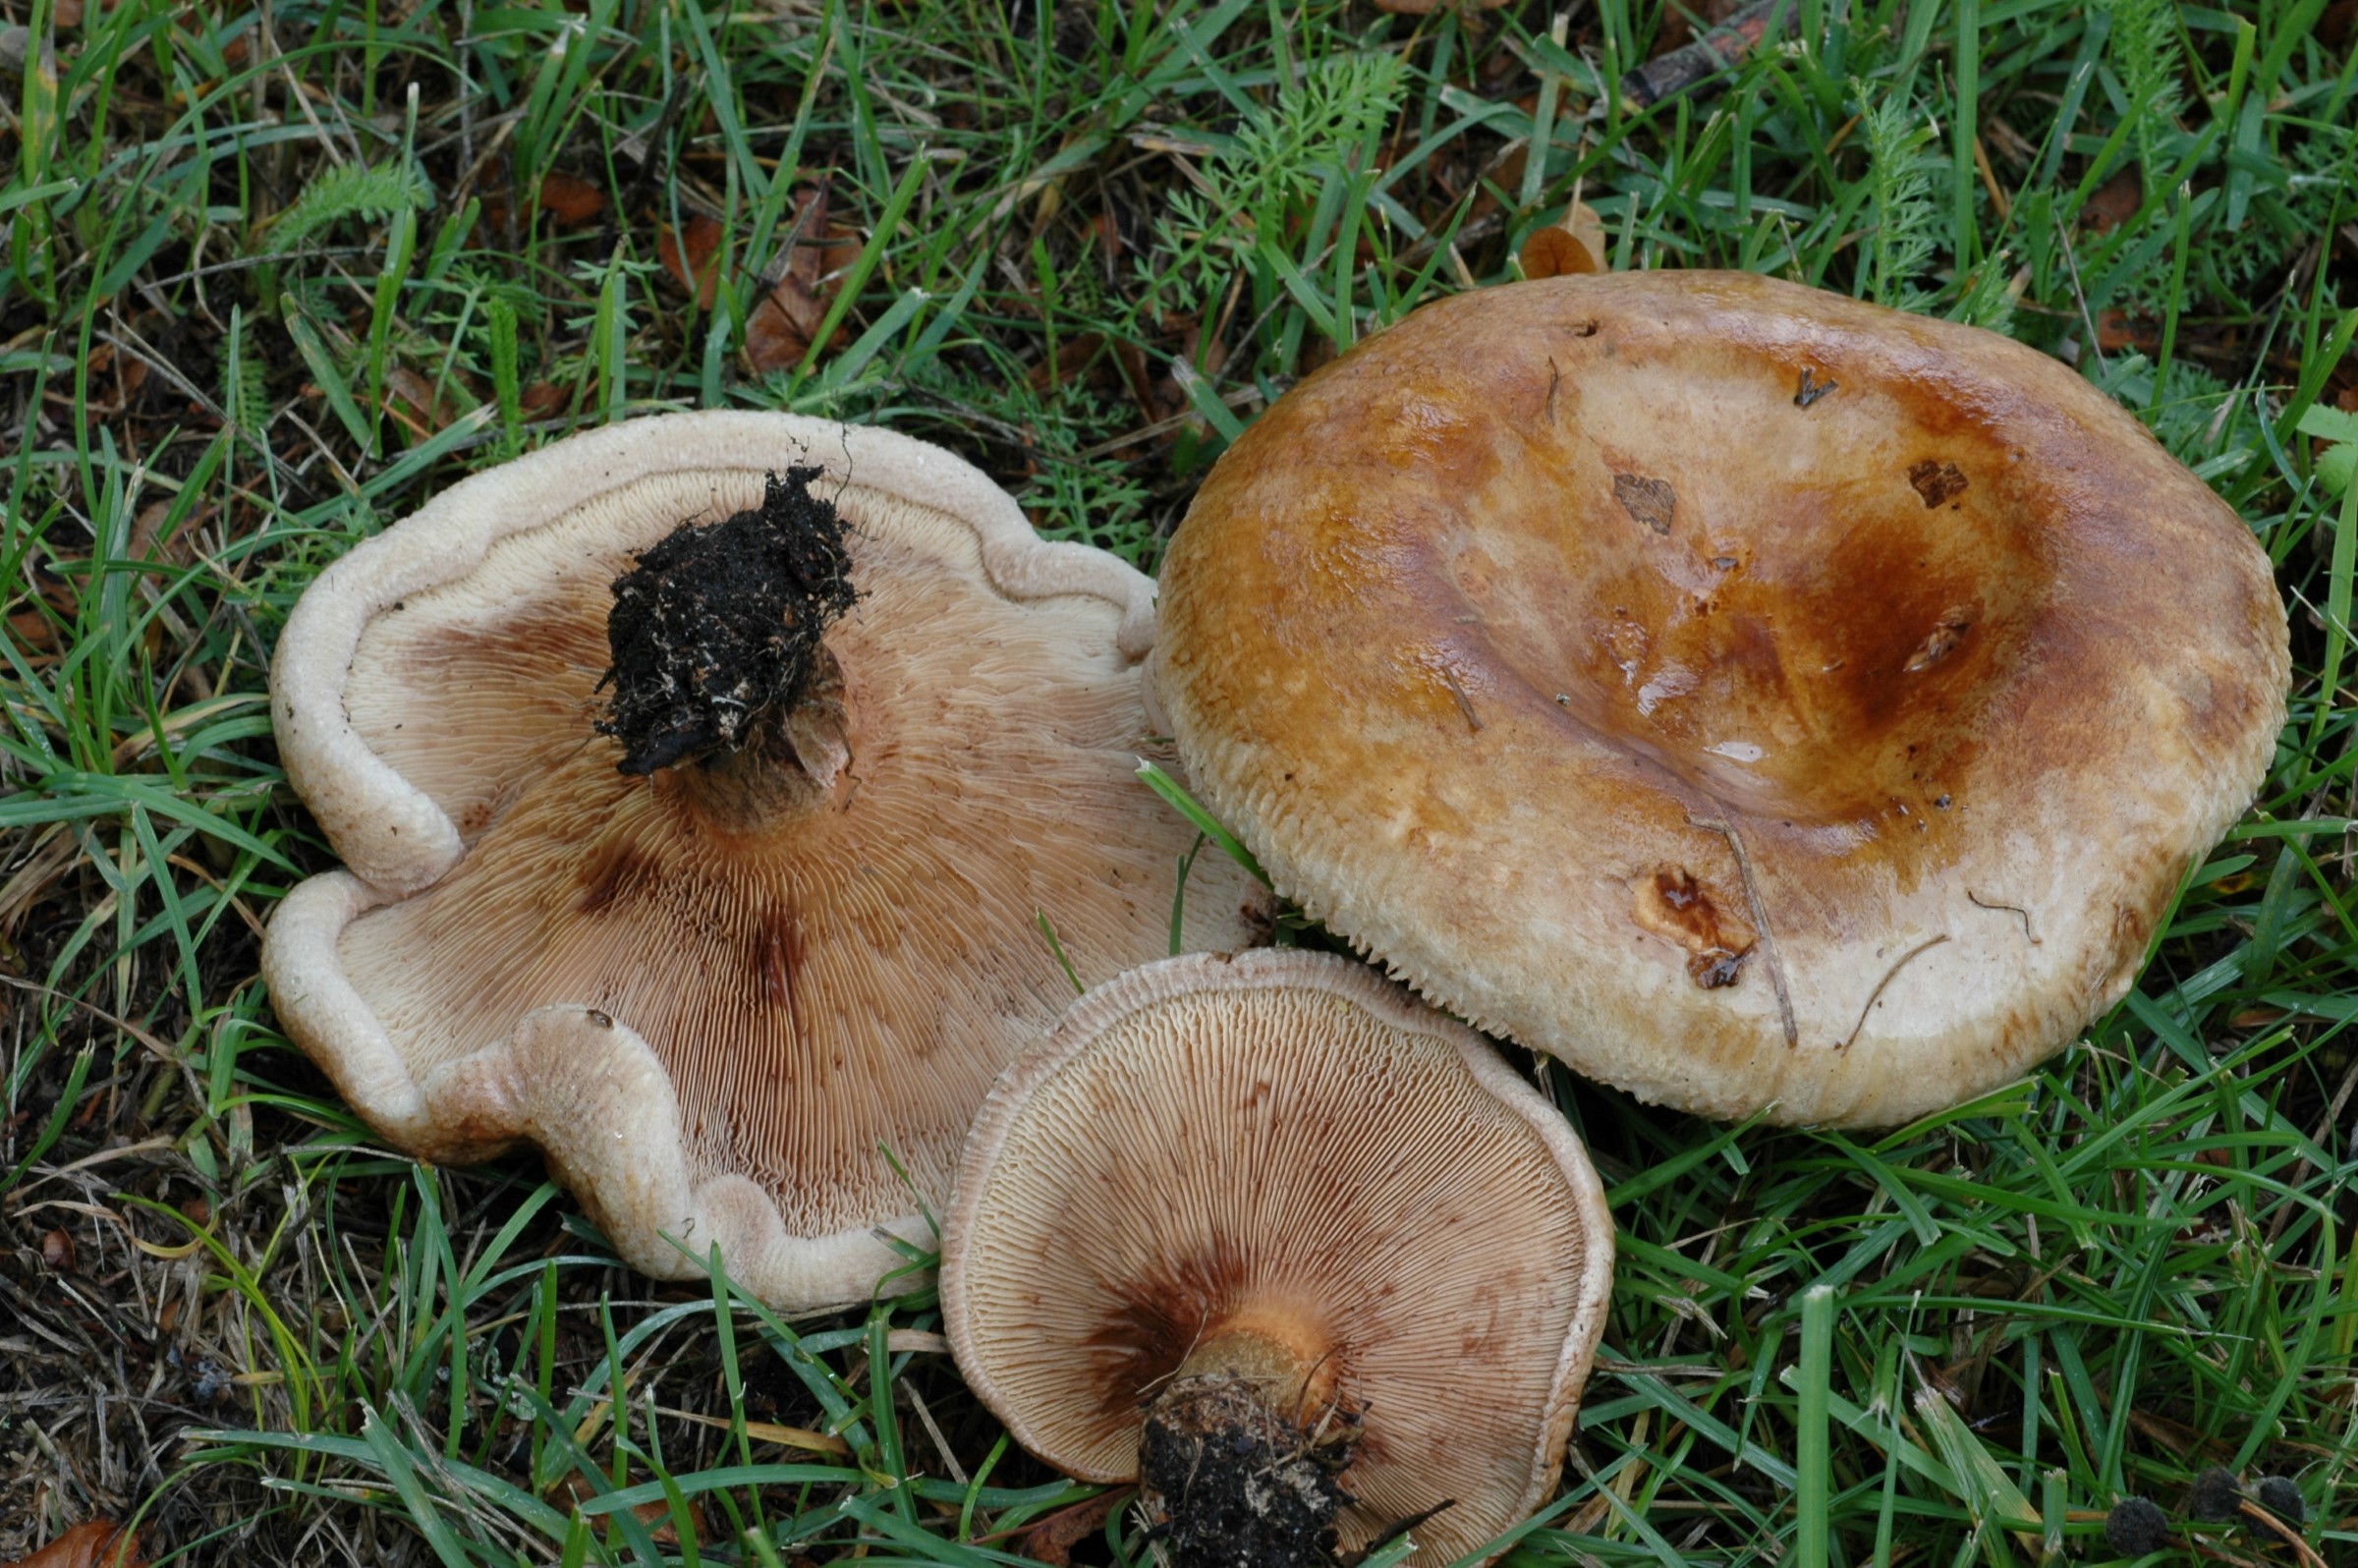 Examples of Brown roll-rims. with brown caps with rolled rims, brown stipes and gills that darken when bruised.